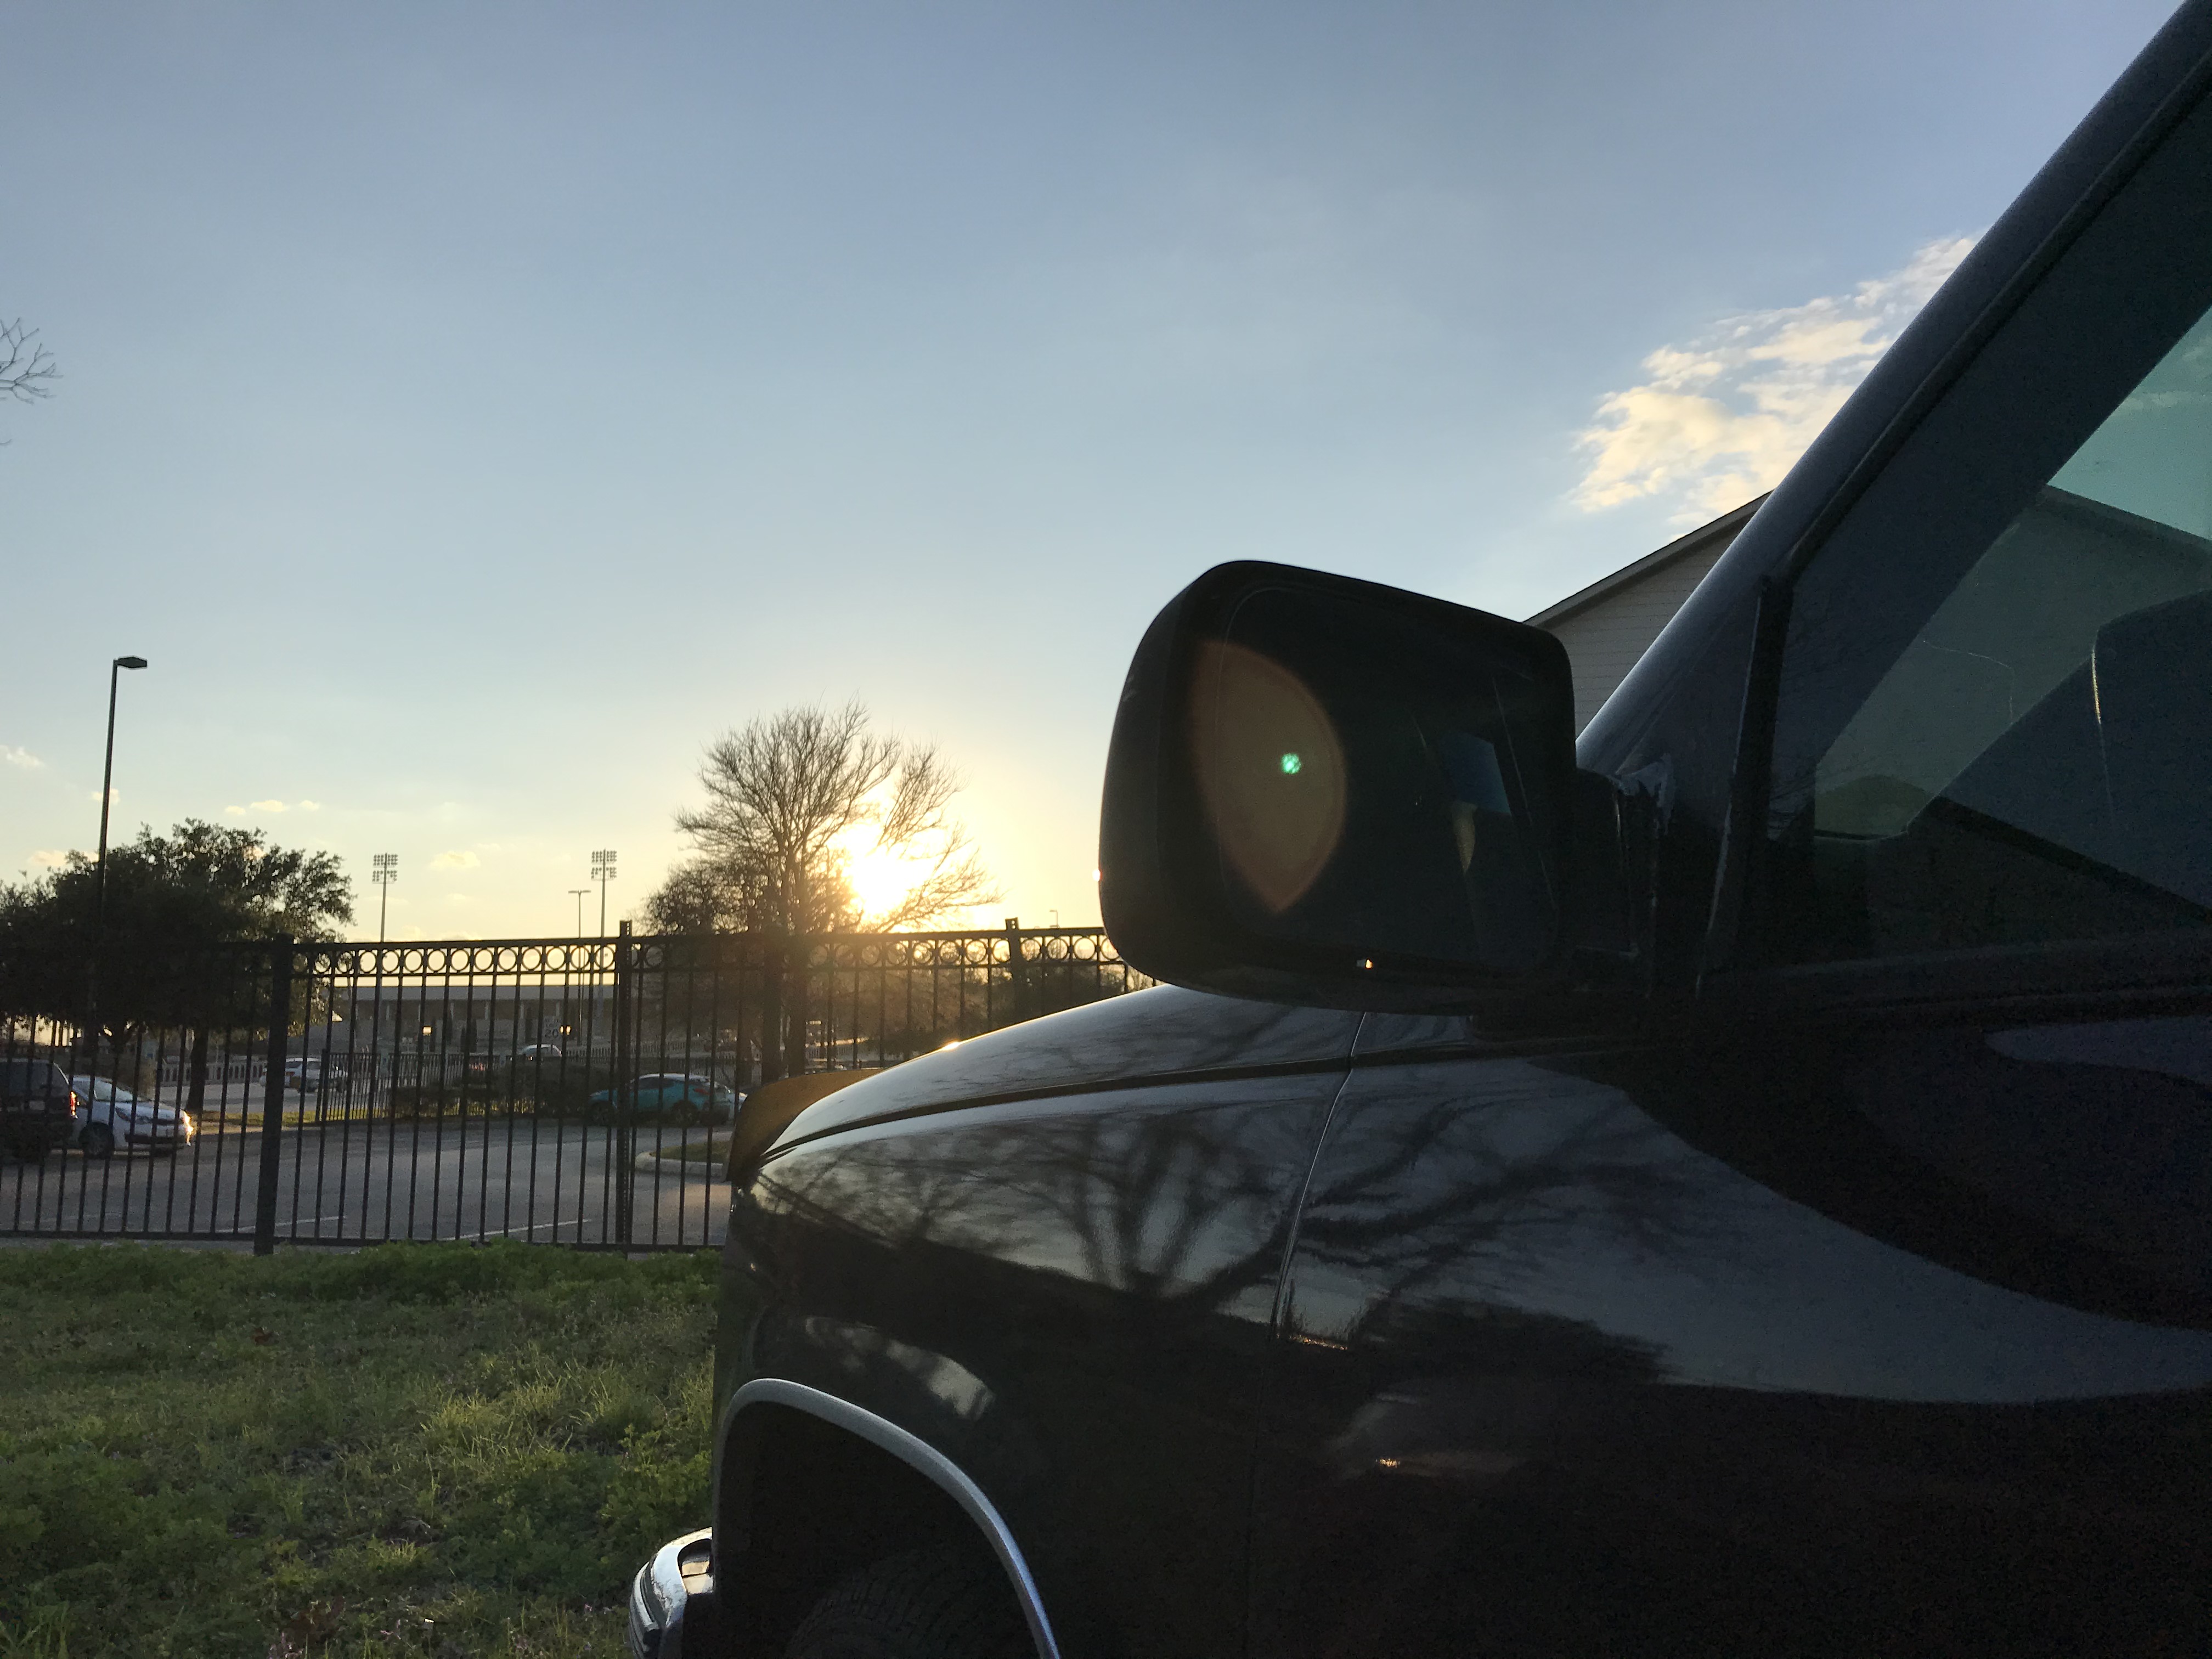 The front of a truck sits off to the right; a building behind it blocks some of the sun's setting rays.